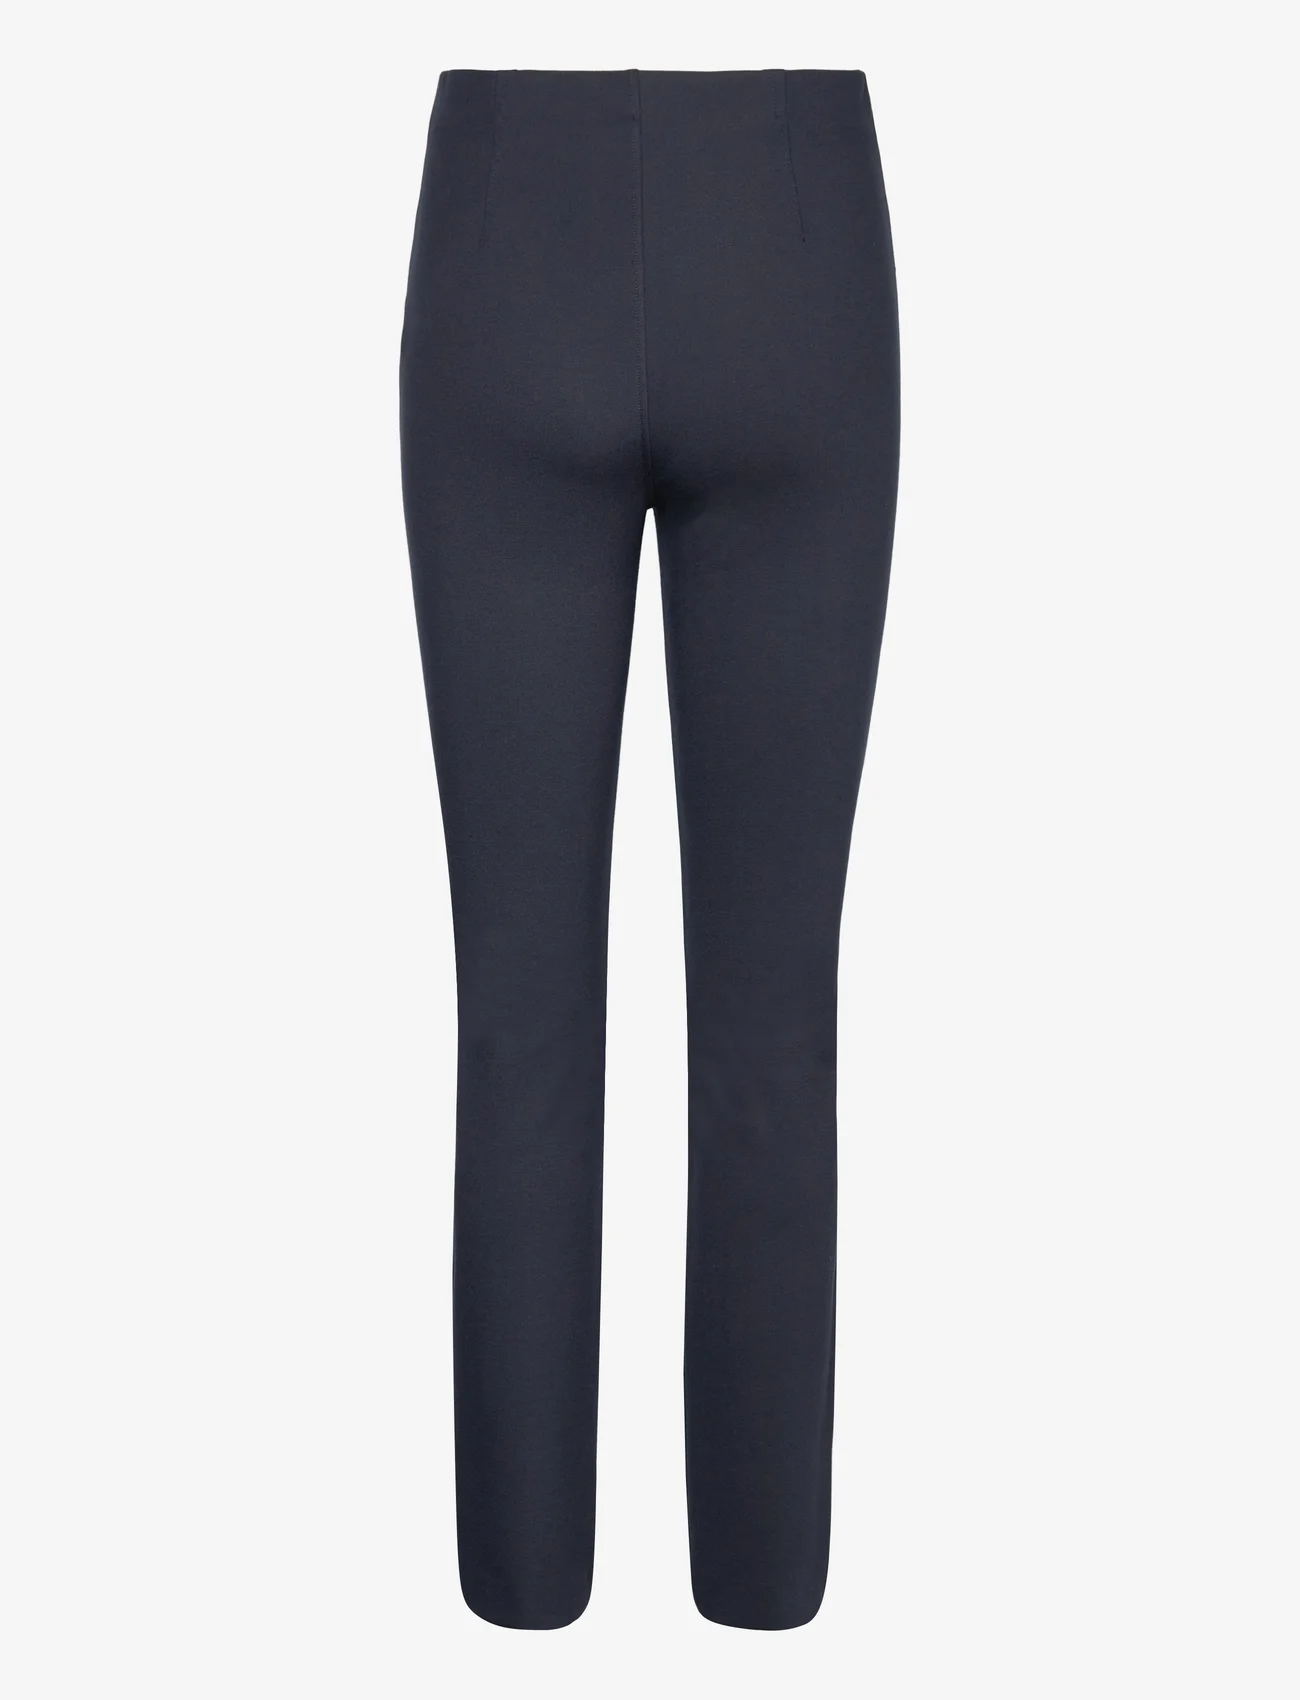 Tommy Hilfiger - ELEVATED SLIM KNITTED PANT - taisna piegriezuma bikses - desert sky - 1